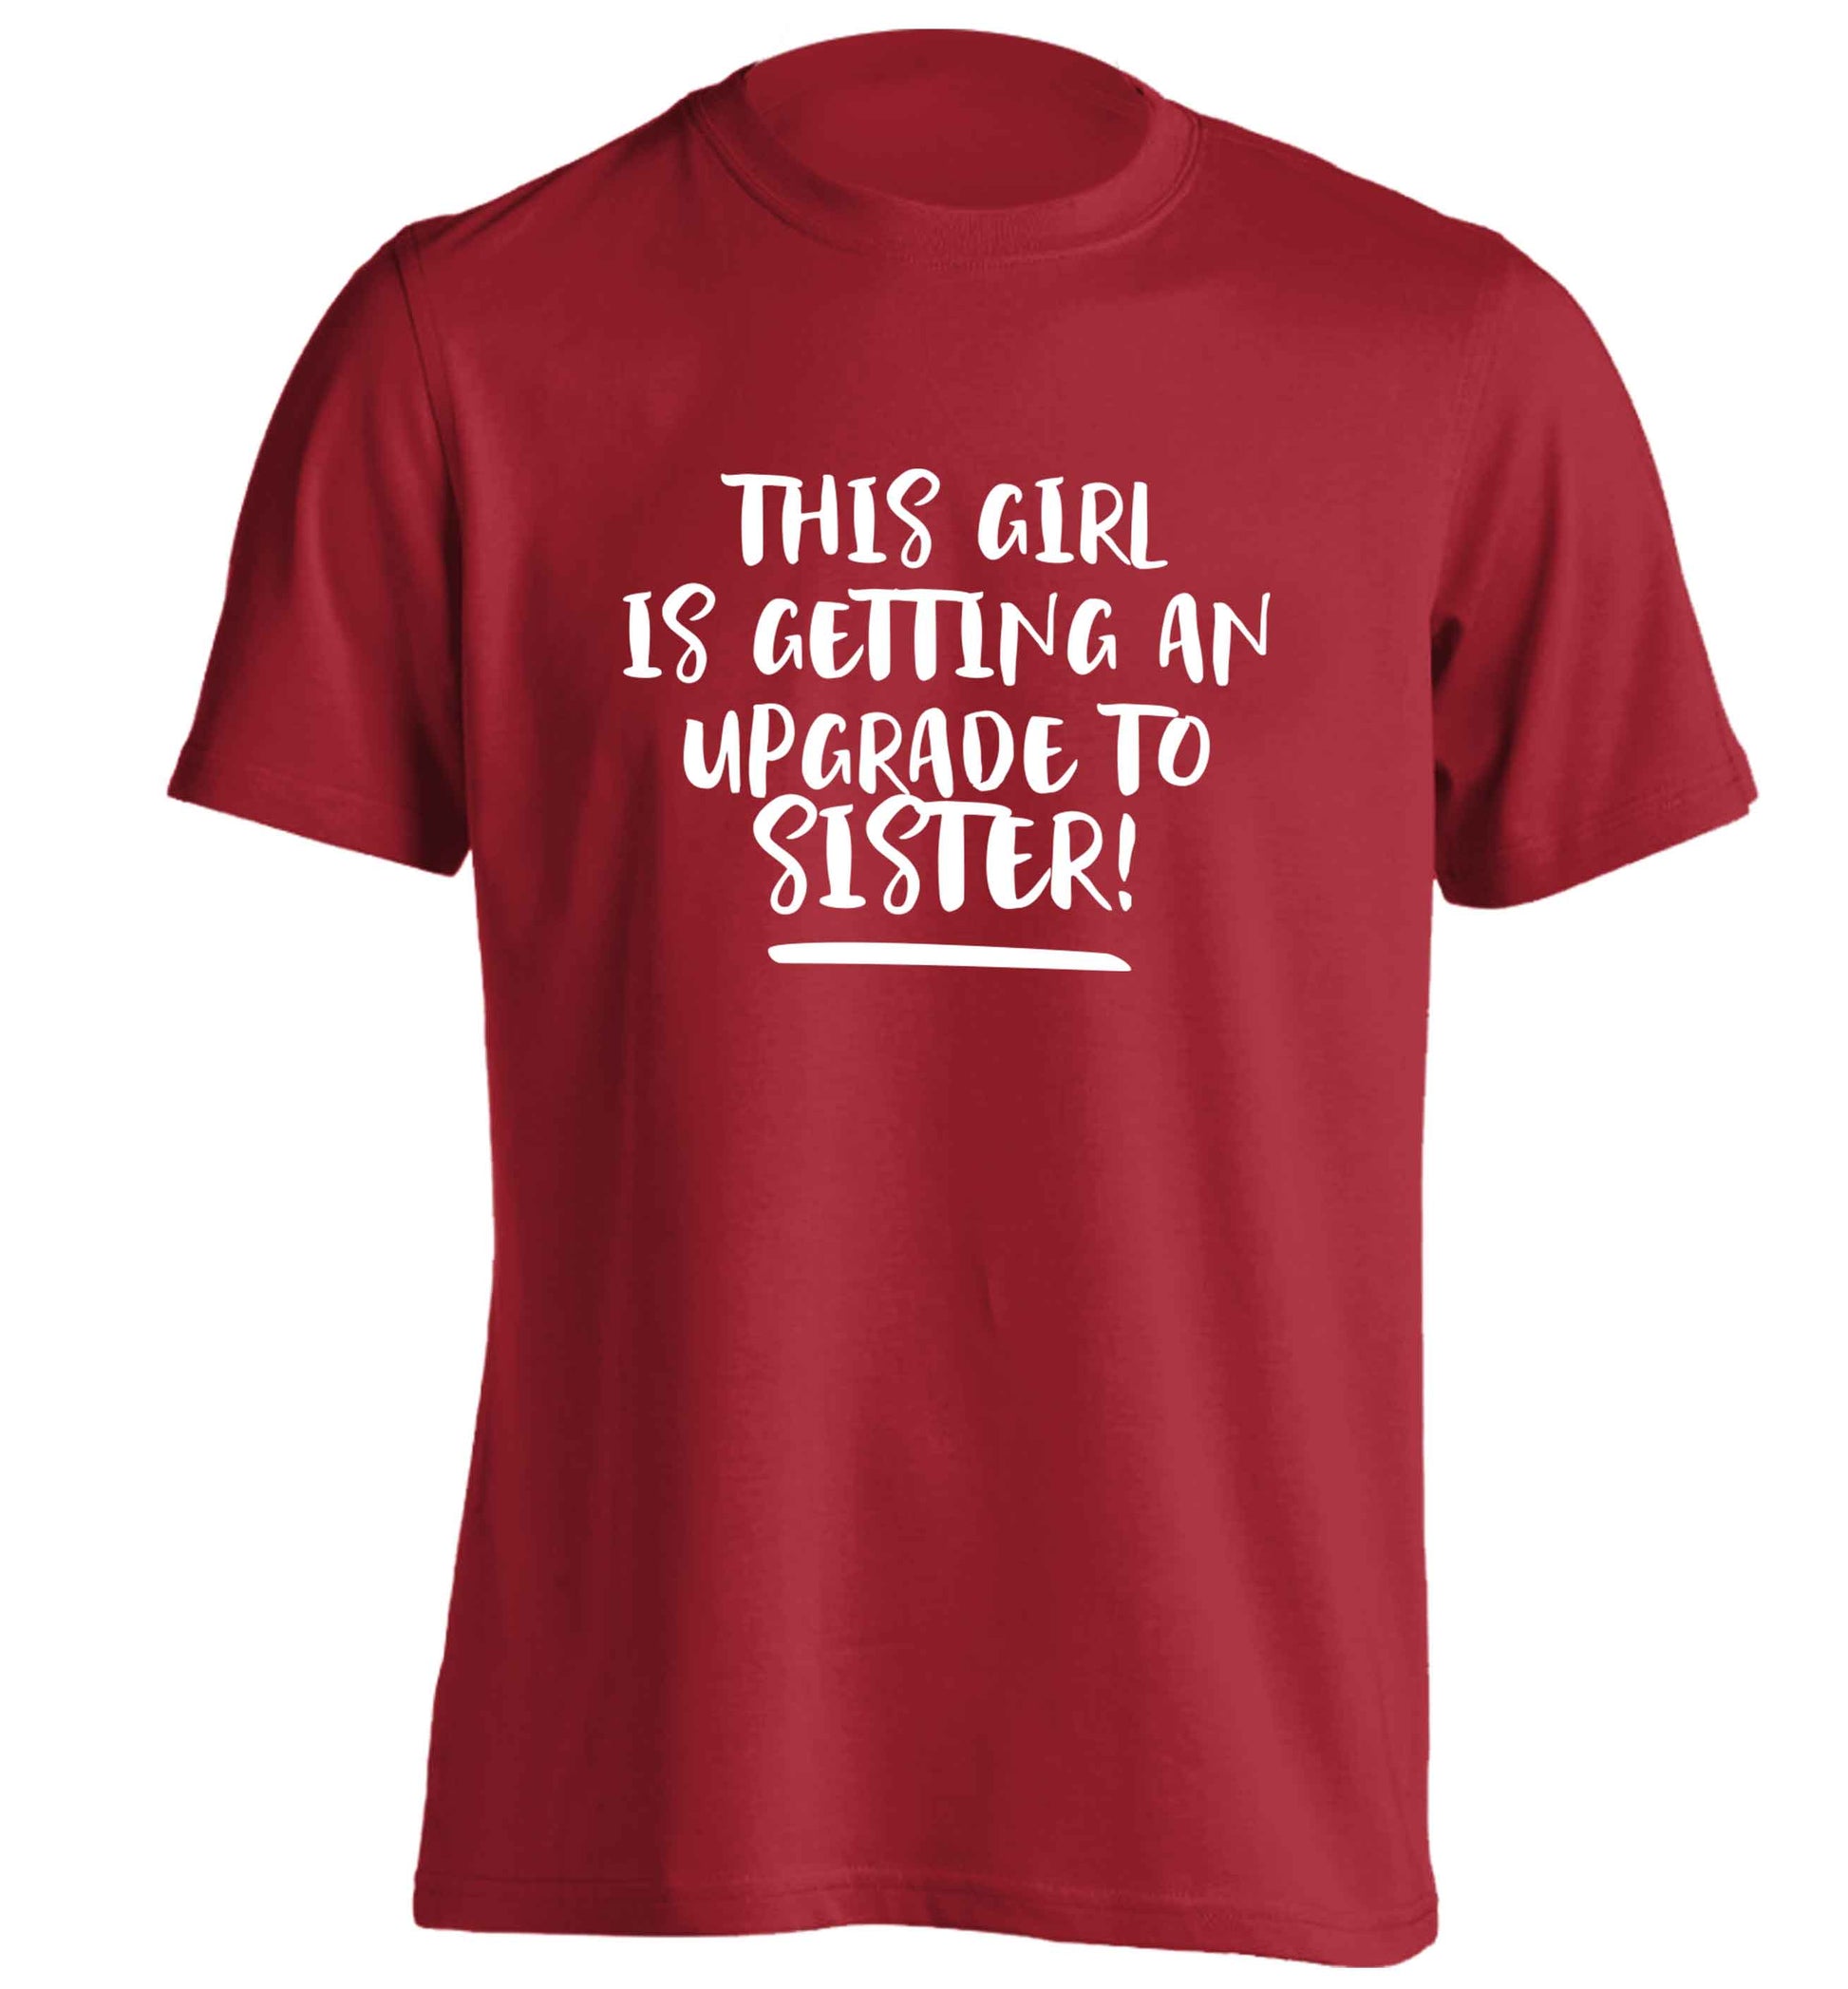 This girl is getting an upgrade to sister! adults unisex red Tshirt 2XL